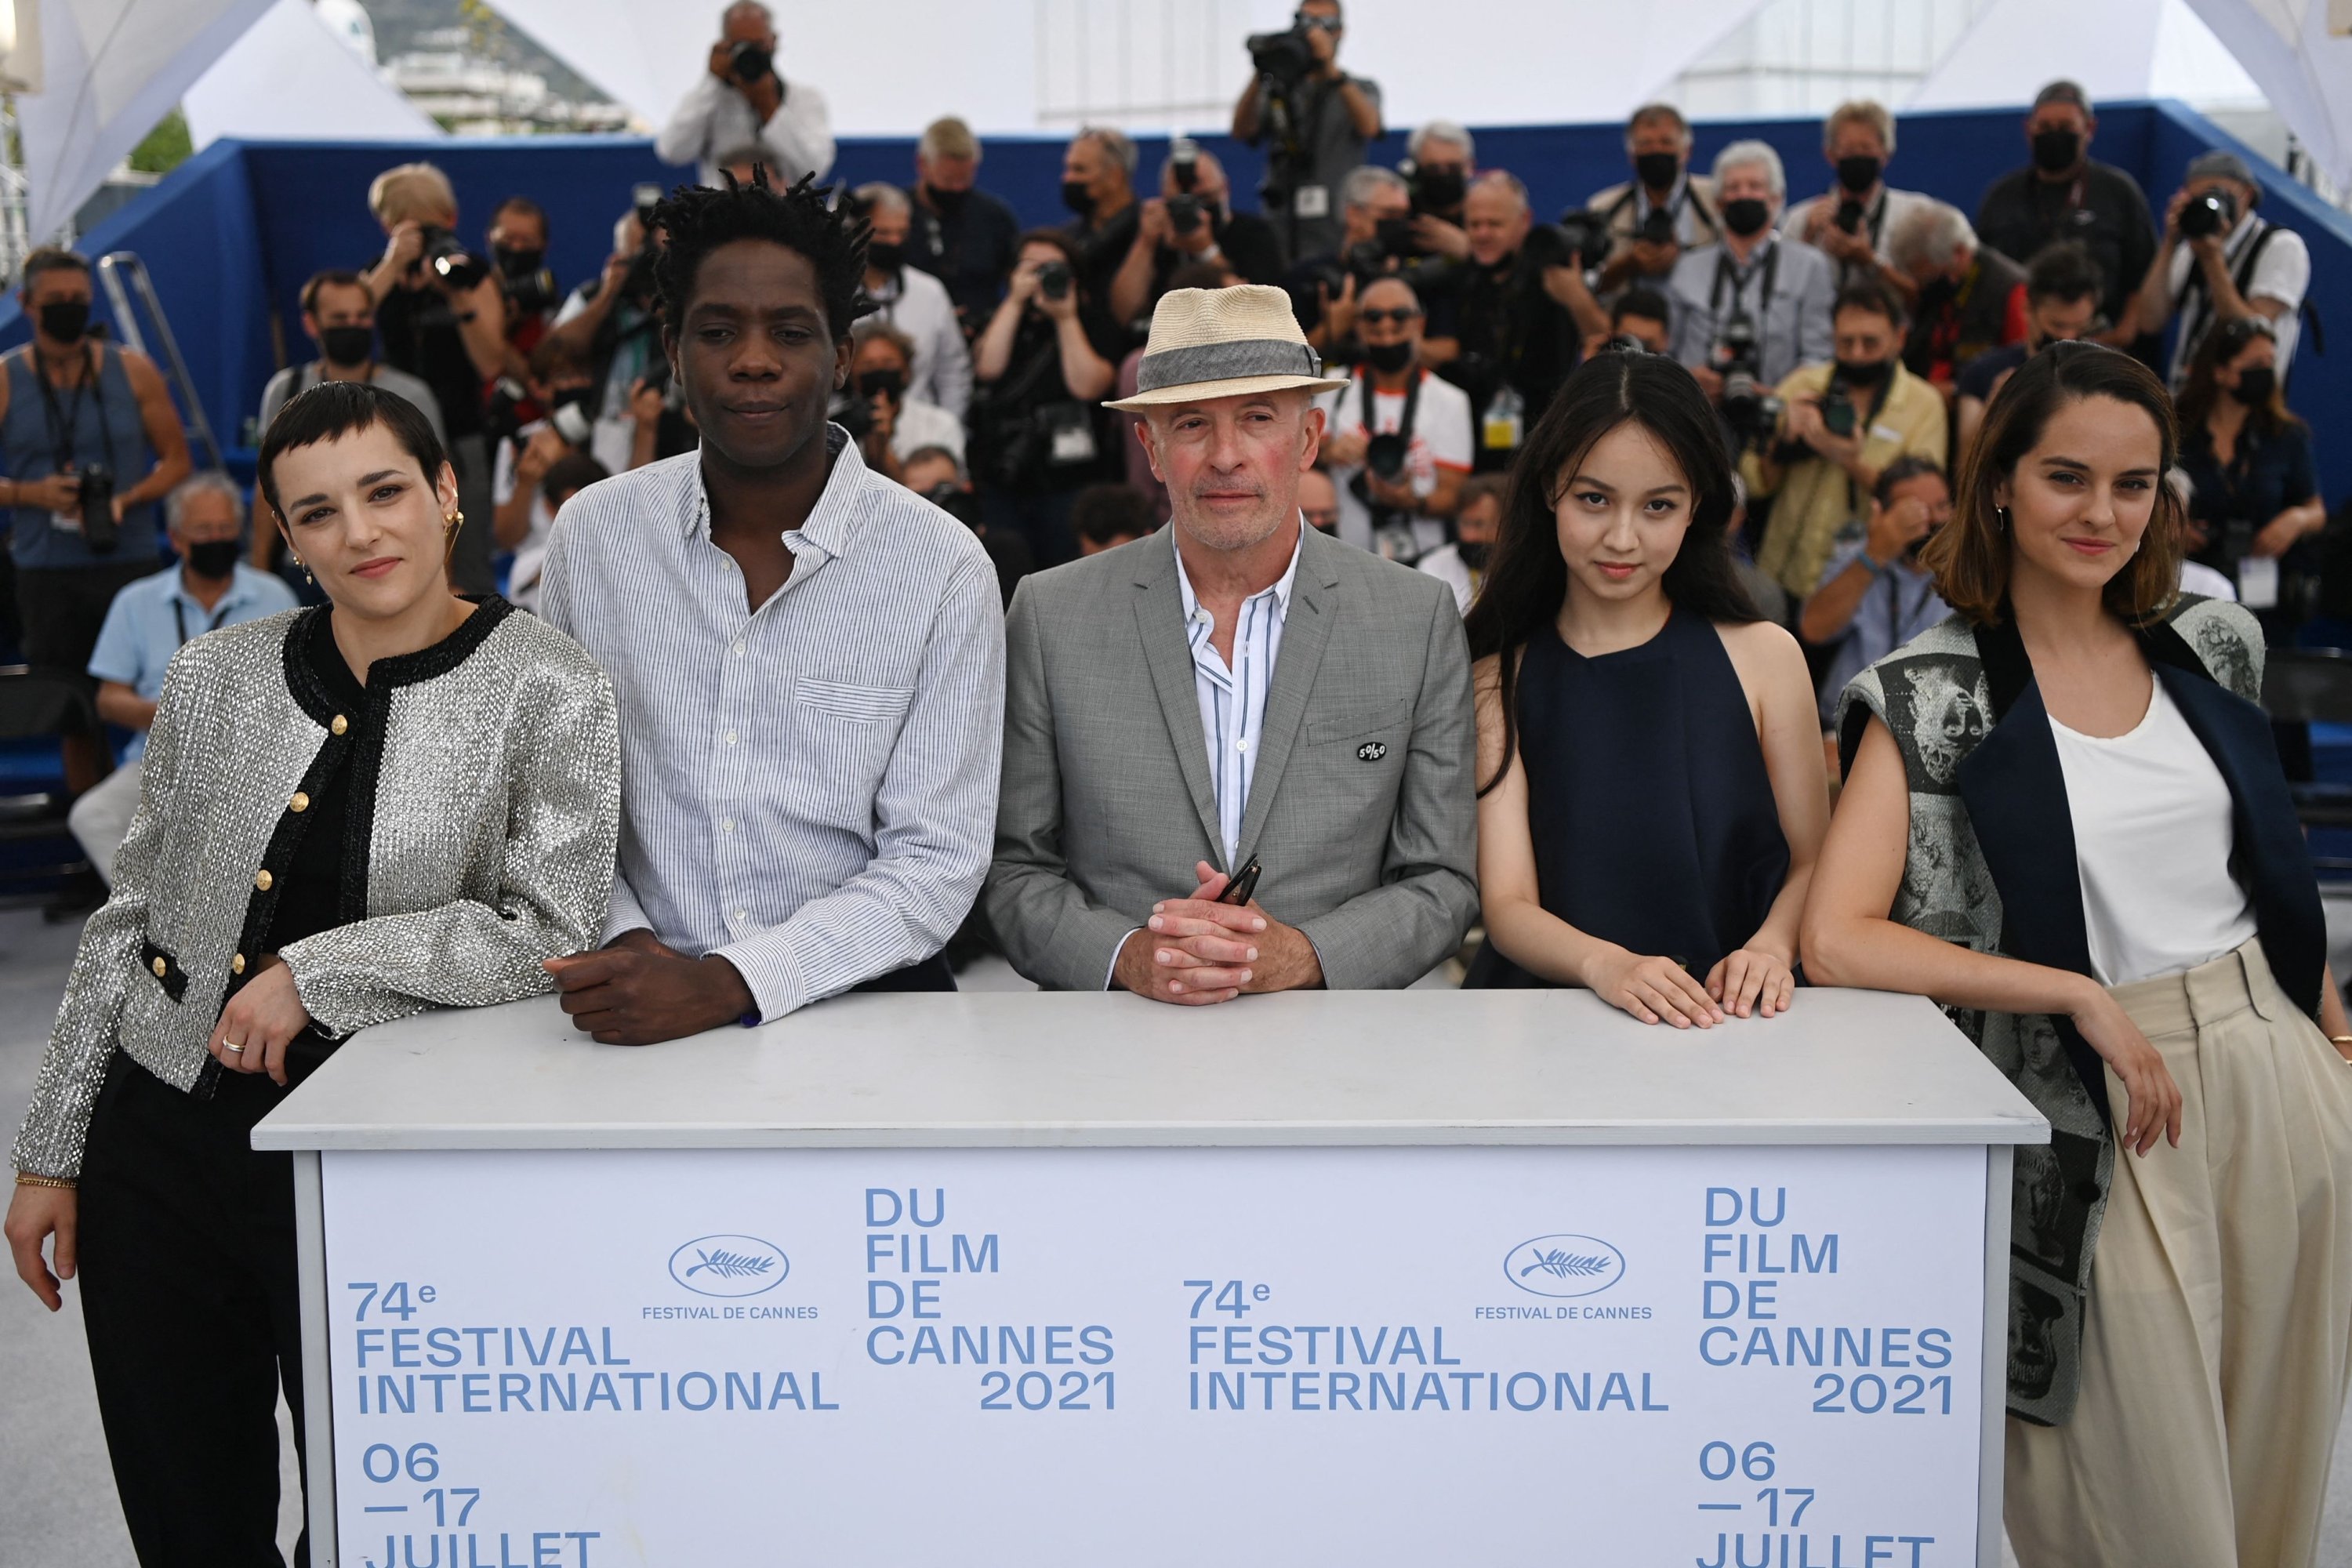 (L-R) French actress and singer Jehnny Beth, French actor Makita Samba, French director Jacques Audiard, French actress Lucie Zhang and French actress Noemie Merlant pose during a photocall for the film "Les Olympiades" ("Paris 13th District") at the 74th edition of the Cannes Film Festival in Cannes, southern France, July 15, 2021. (AFP Photo)